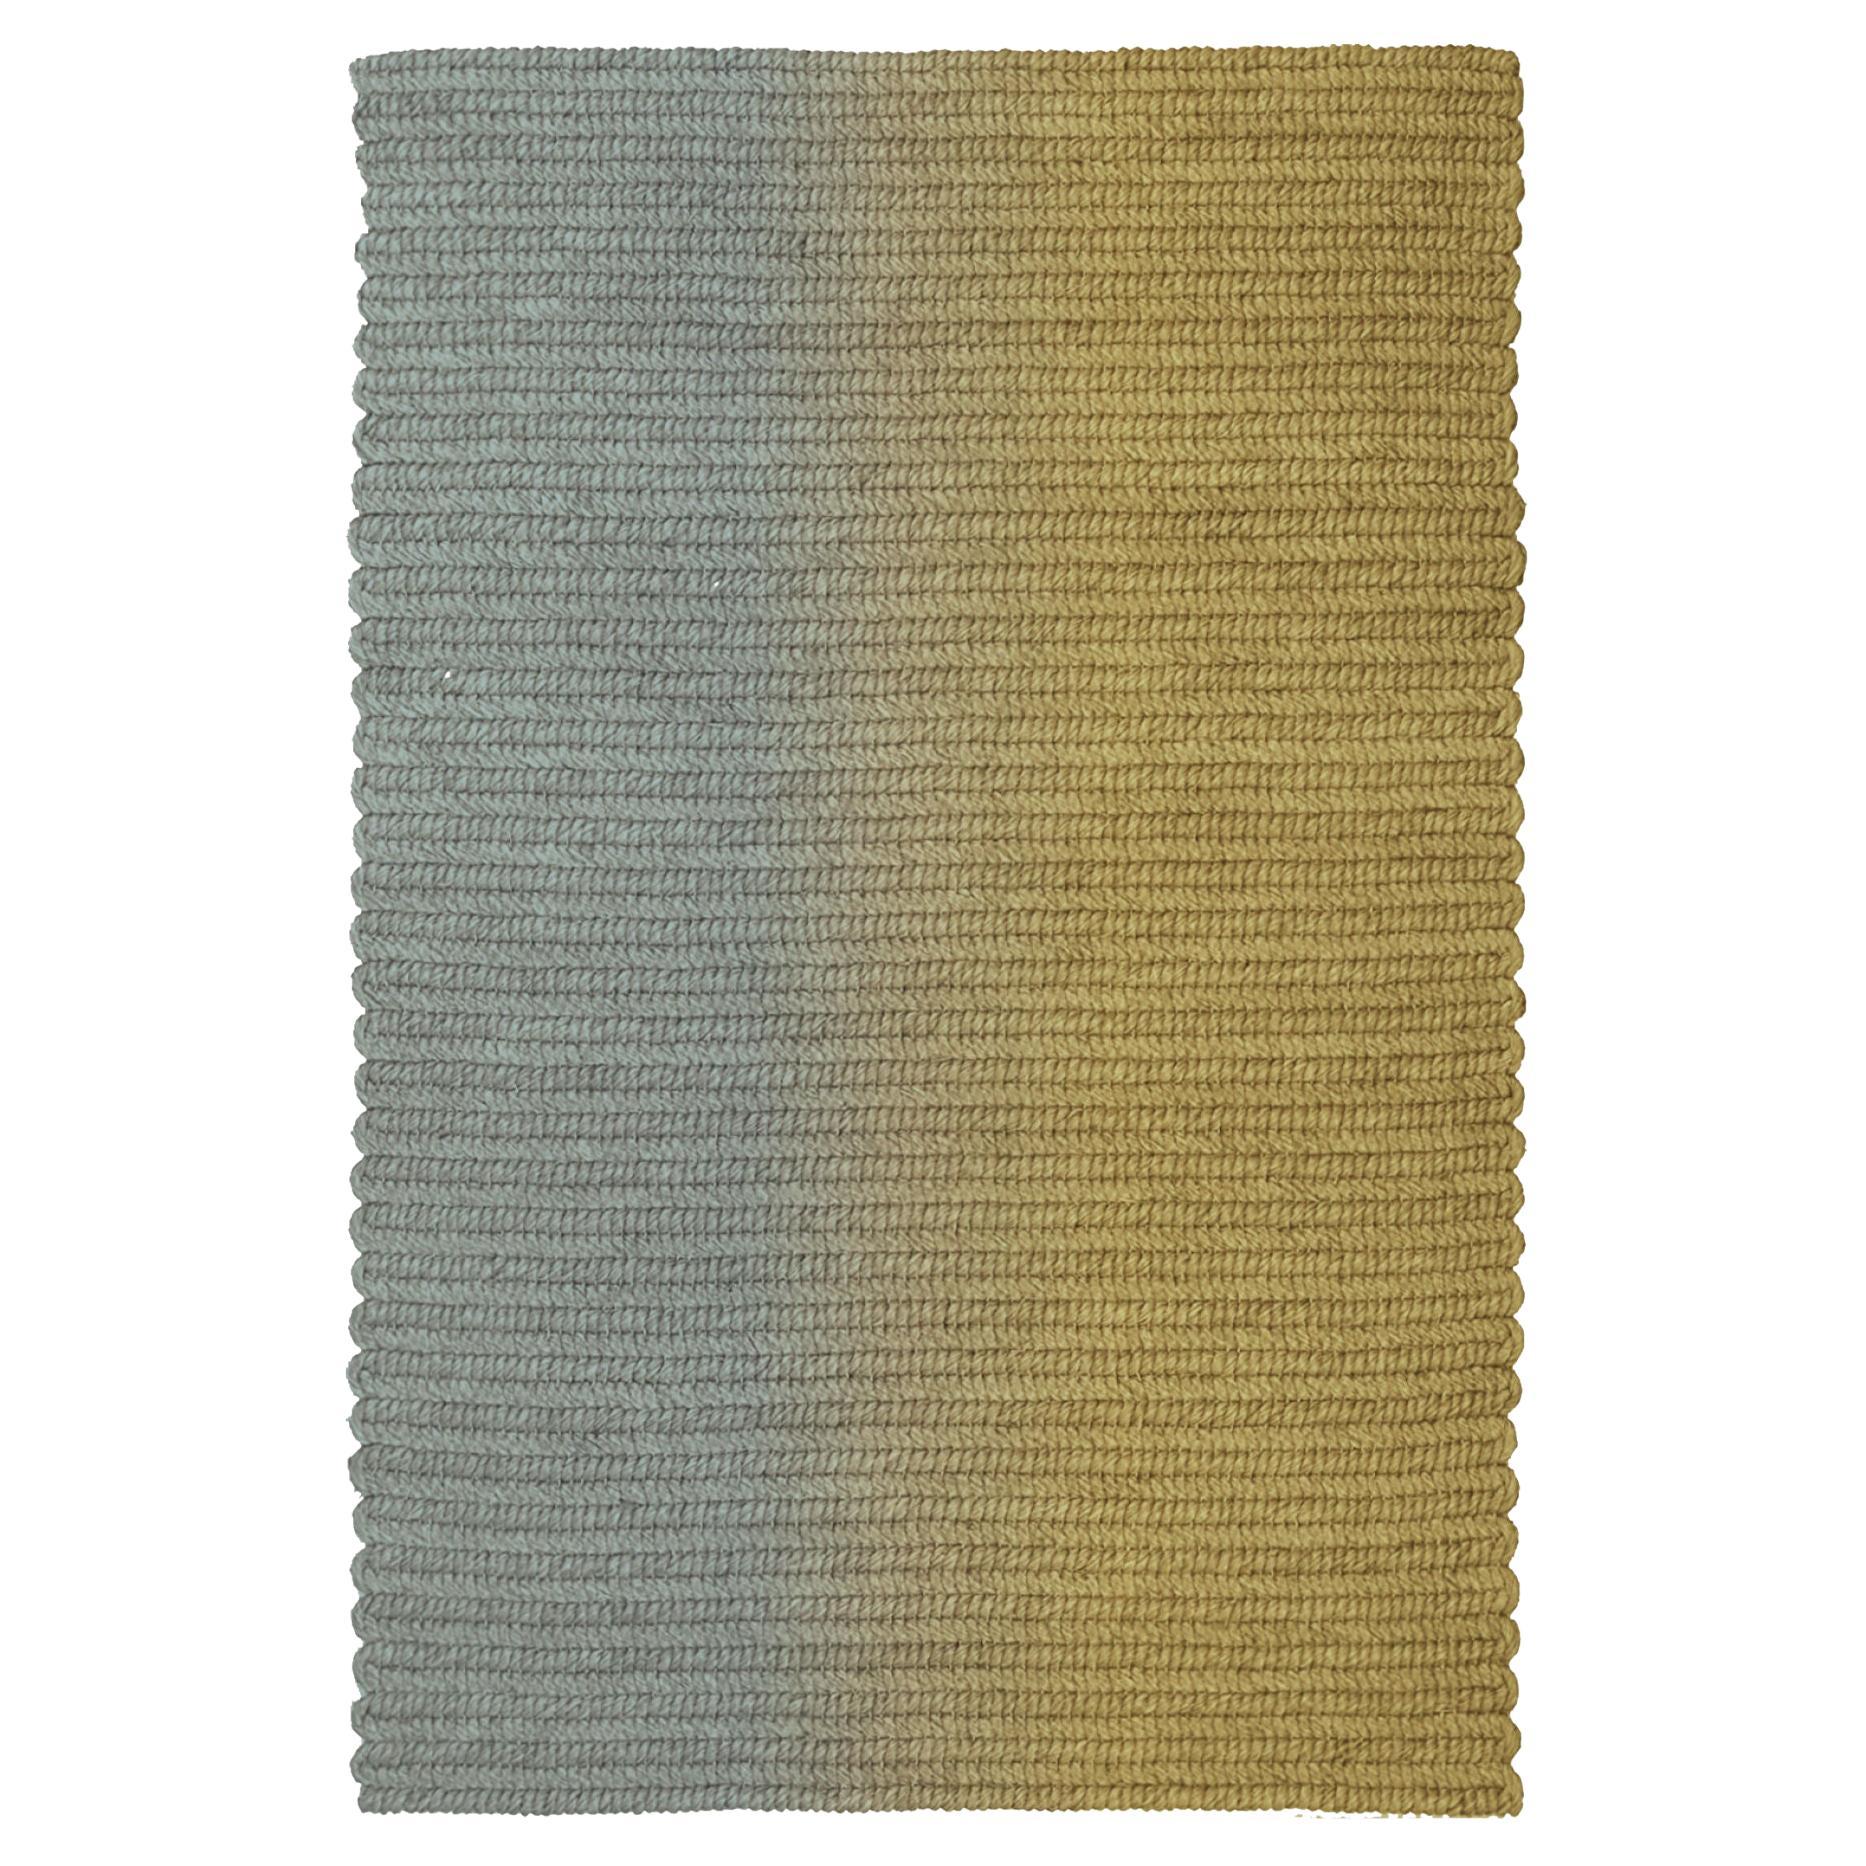 'Switch' Rug in Abaca, 'Pampas' by Claire Vos for Musett Design